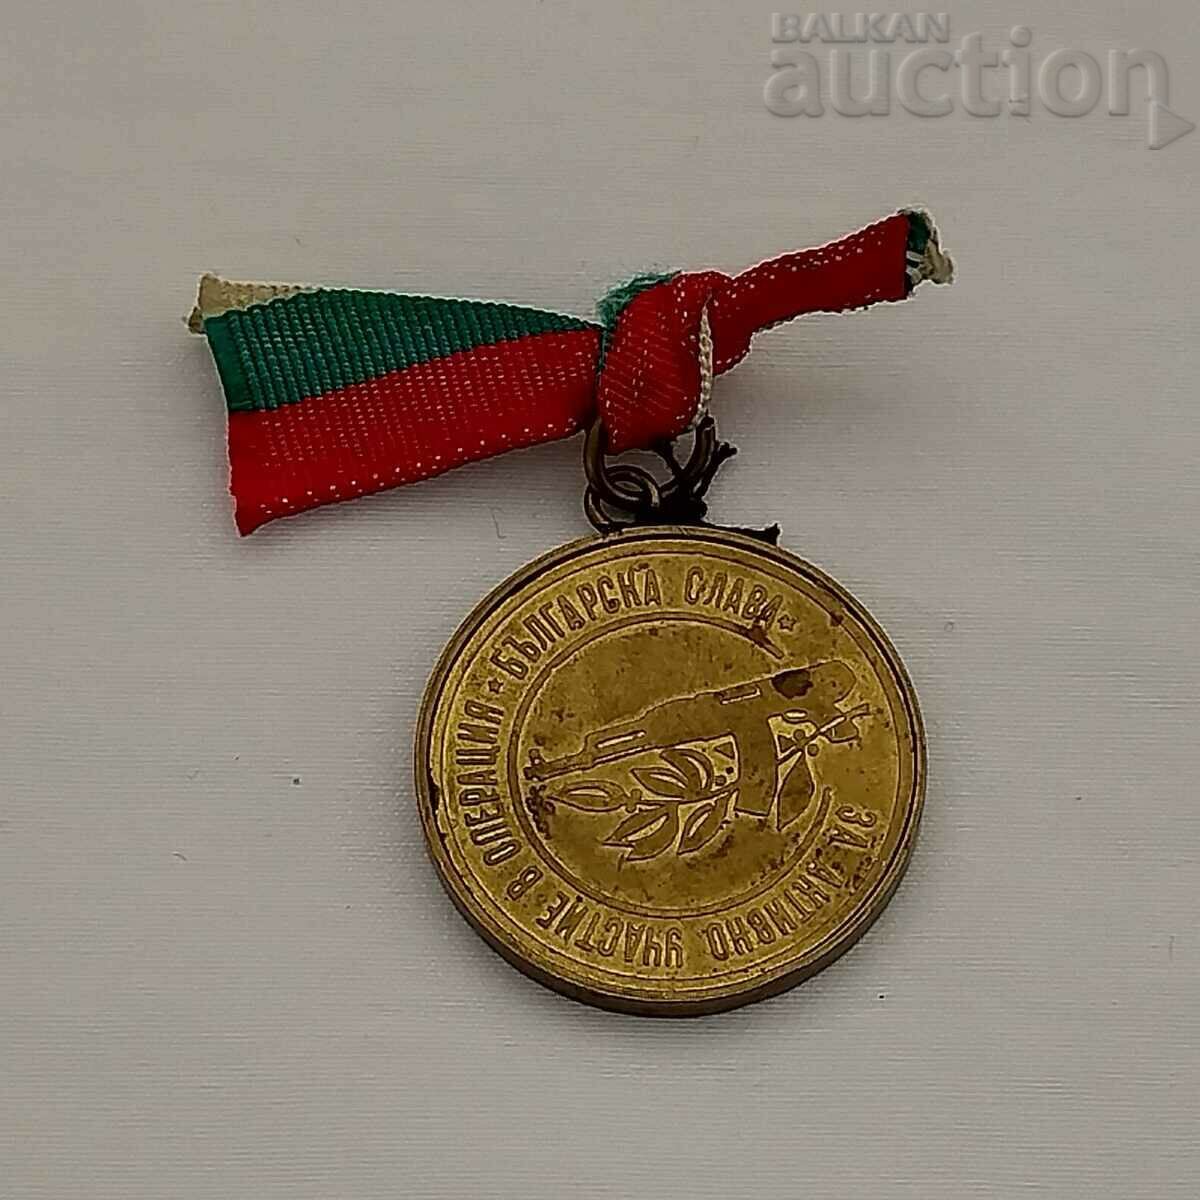 OPERATION "BULGARIAN GLORY" PARTICIPATION MEDAL